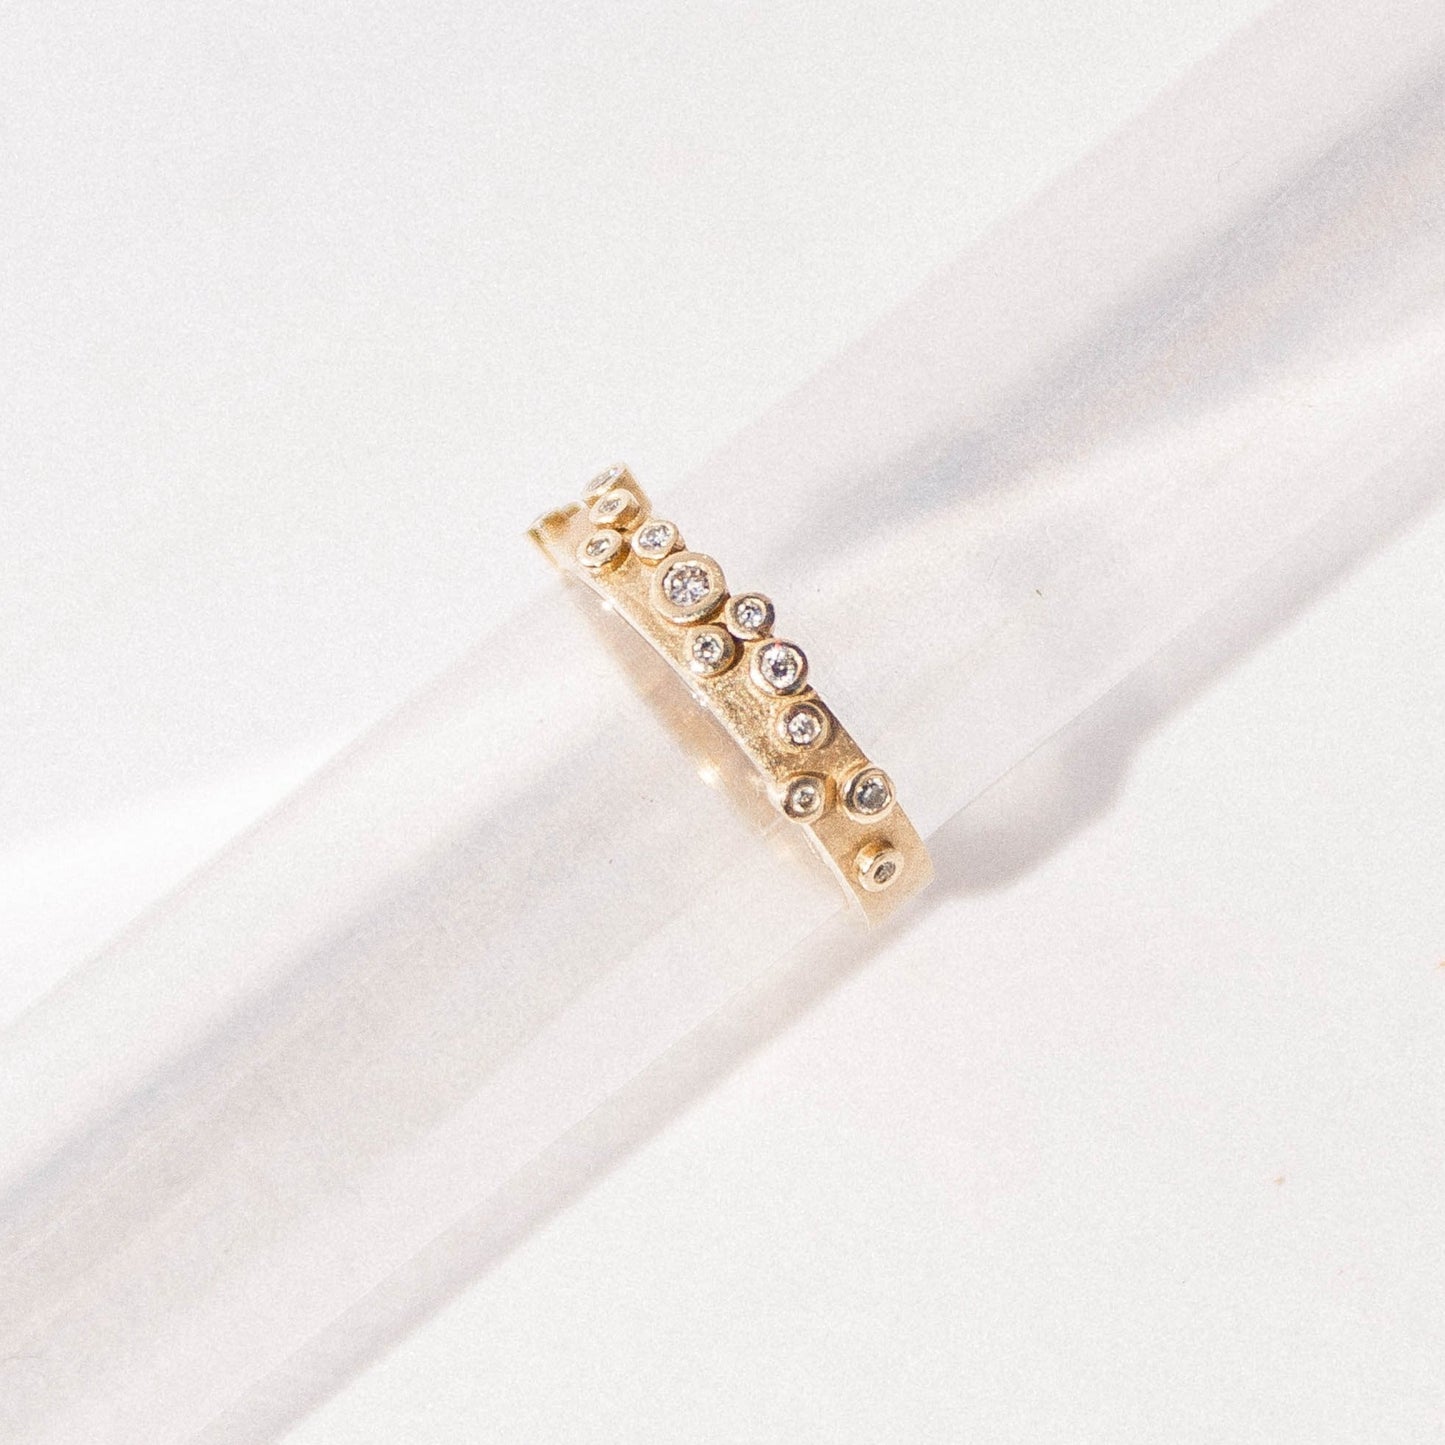 Constellation Ring in Solid 9ct Gold